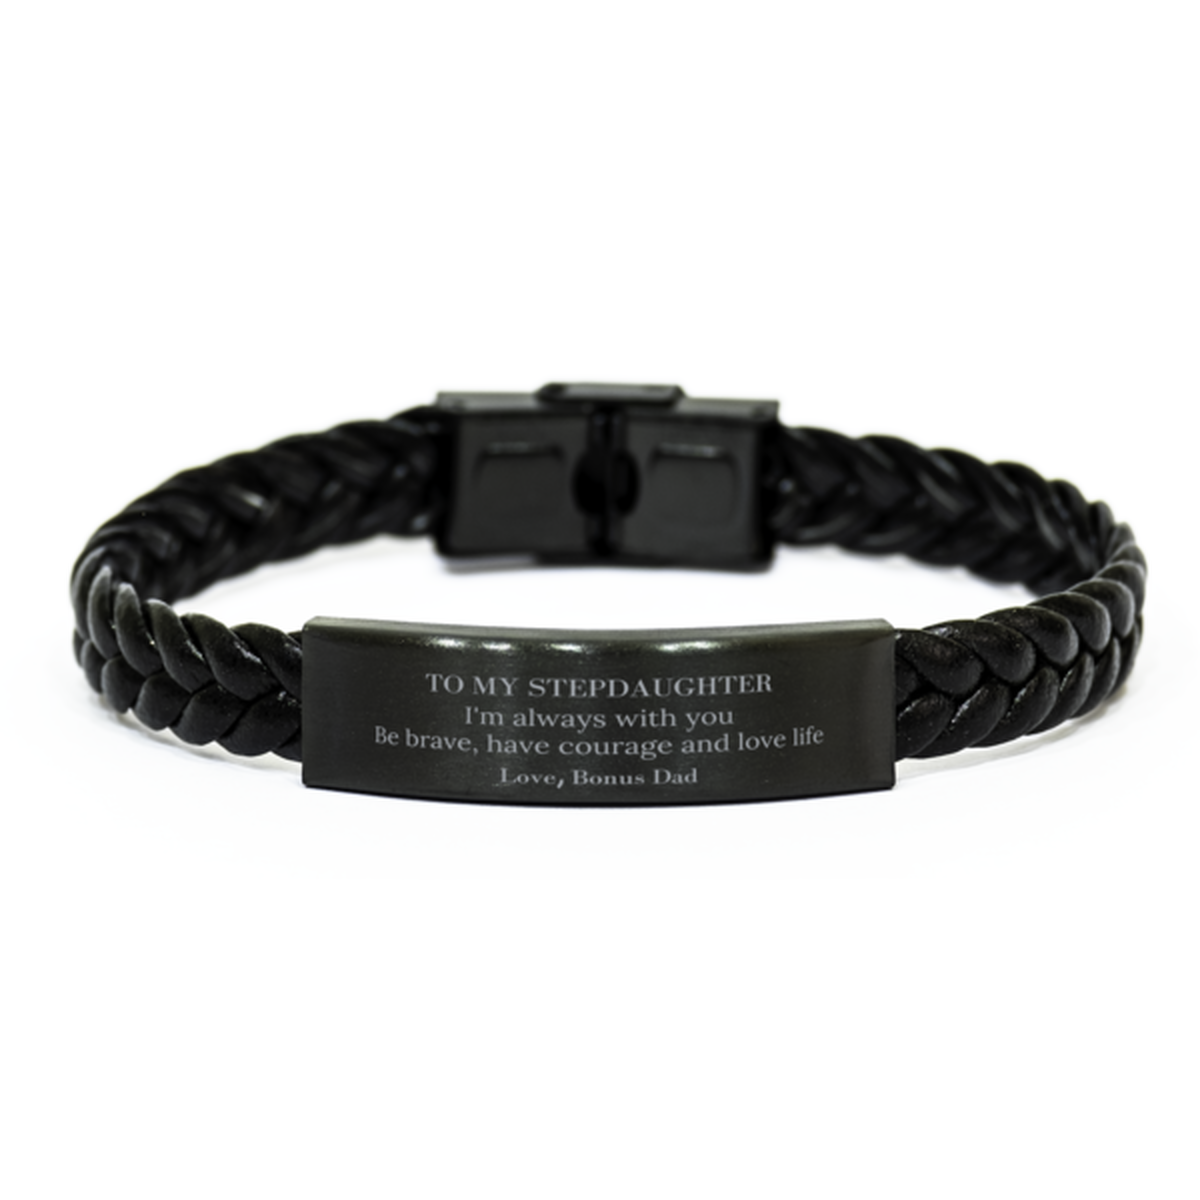 To My Stepdaughter Gifts from Bonus Dad, Unique Braided Leather Bracelet Inspirational Christmas Birthday Graduation Gifts for Stepdaughter I'm always with you. Be brave, have courage and love life. Love, Bonus Dad